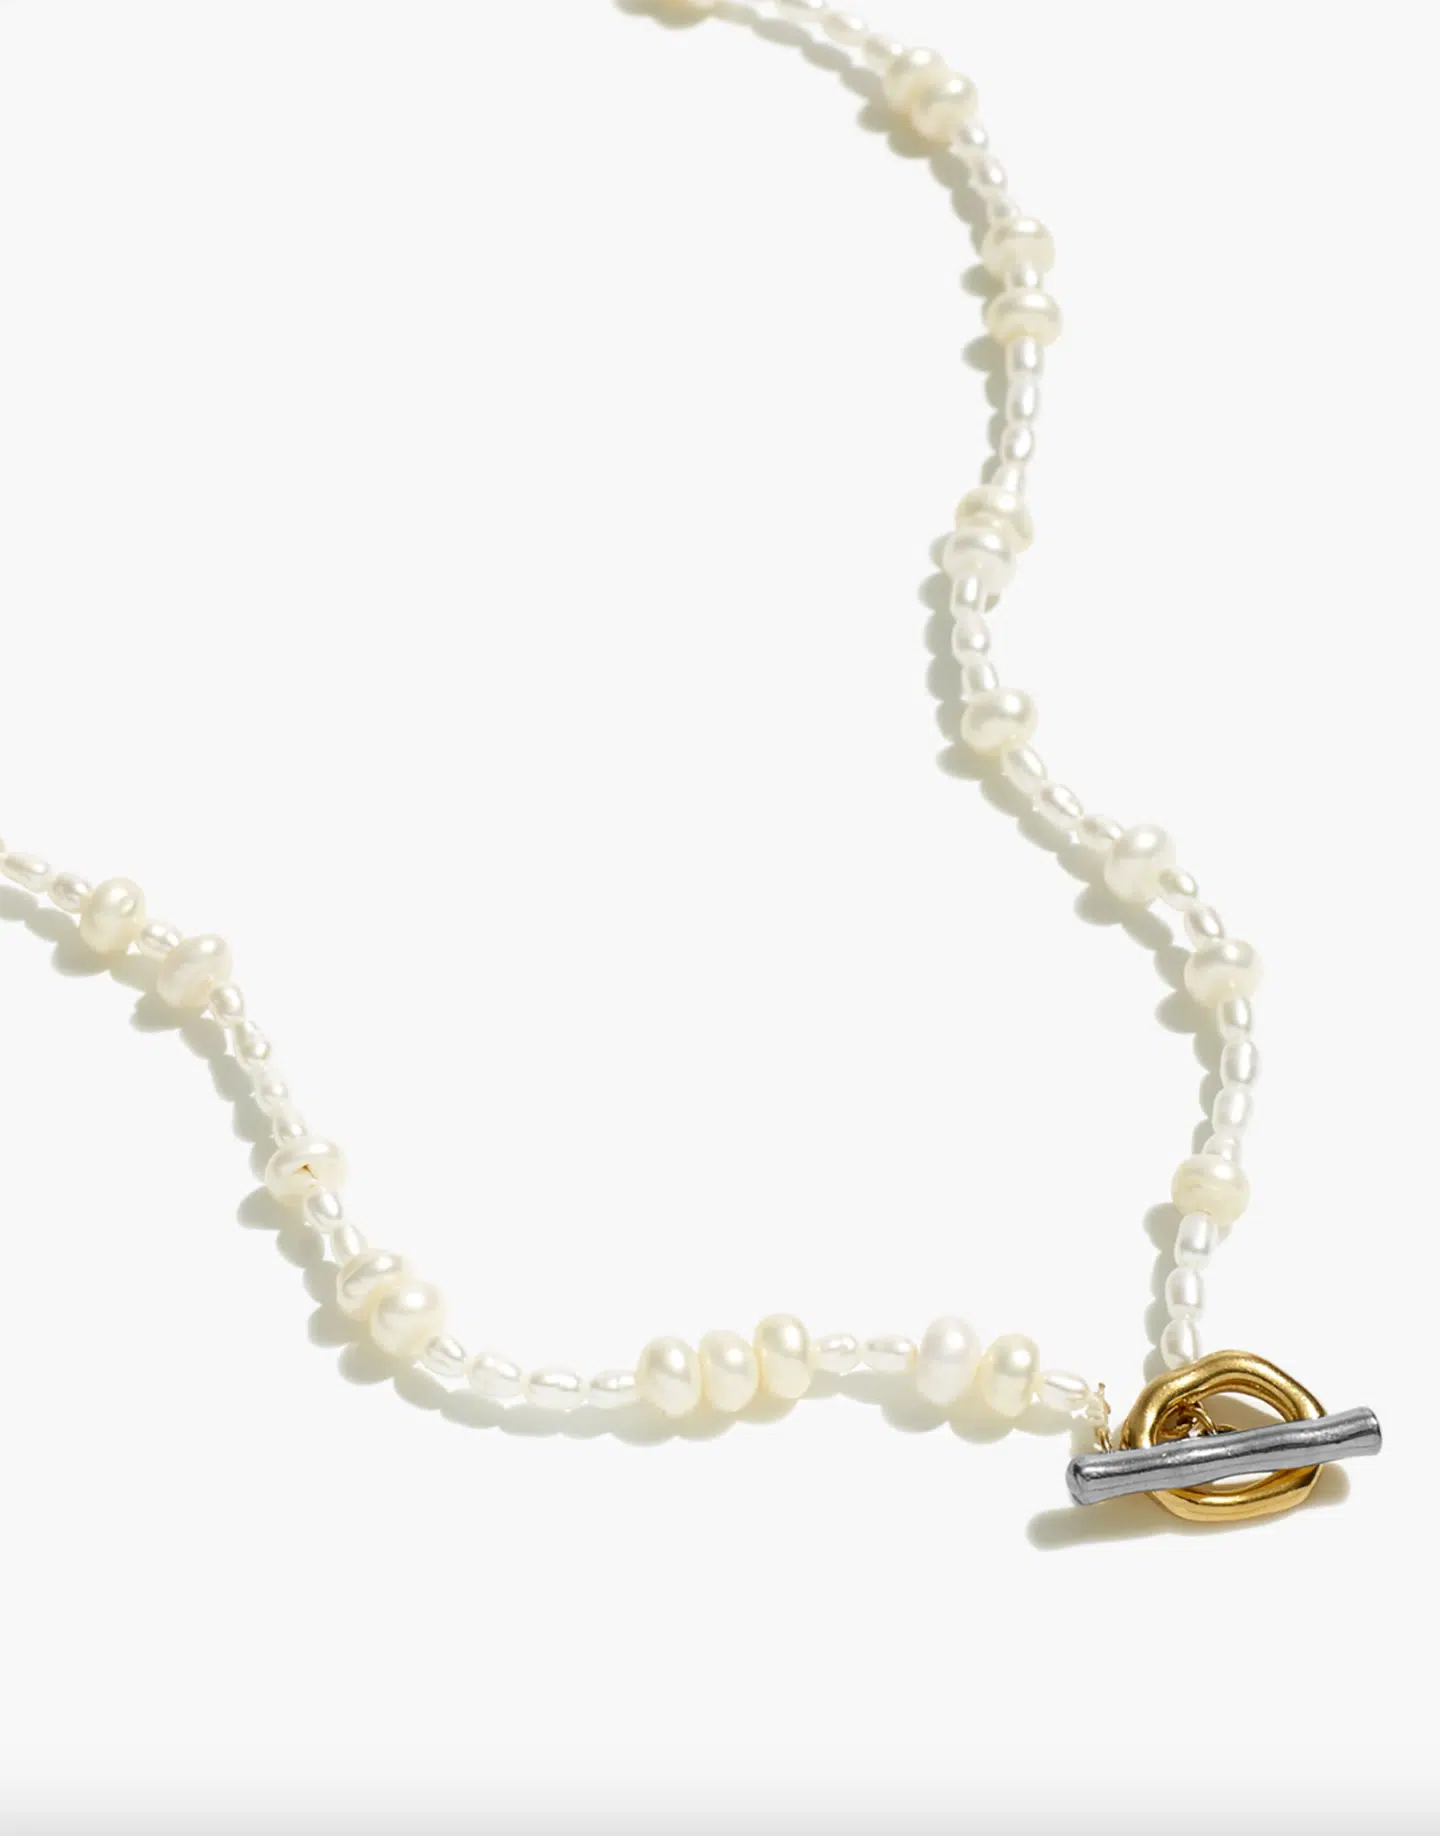 Chanel Necklace Dupe Picks: 7 Chic and Affordable You'll LOVE